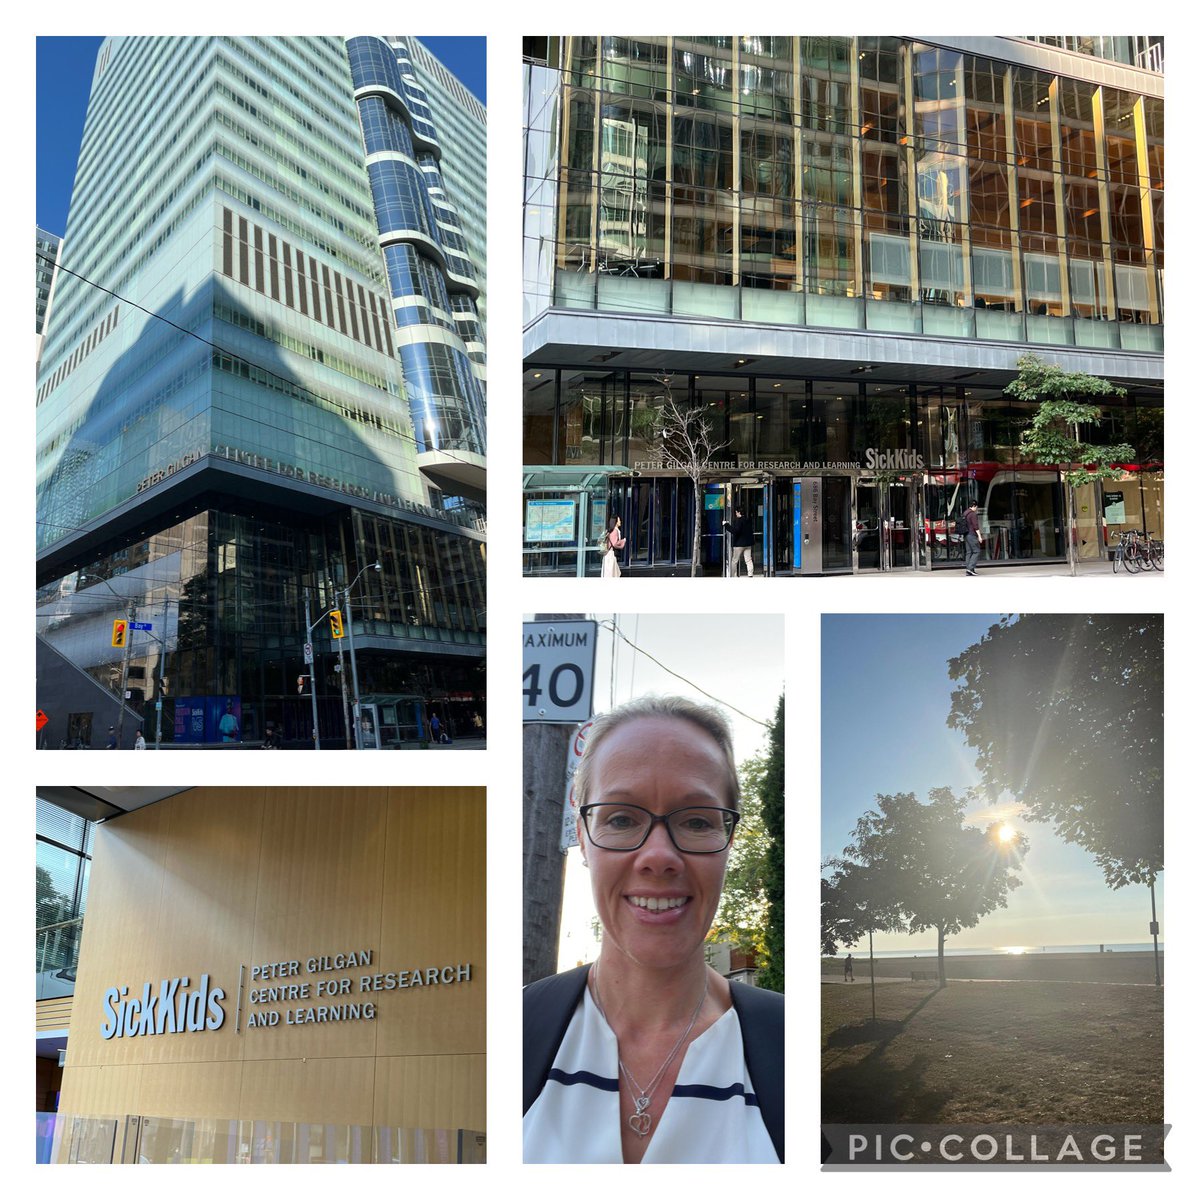 Amazing week w @lindsayjibb @ Peter Giligan Research Centre @sickkids discussing intervention research &shared interests.Presented findings from @redmapp_study &met w clinicians.Thank you @SKC_UK for making this possible with a research travel bursary. Next stop @WorldSIOP ✈️